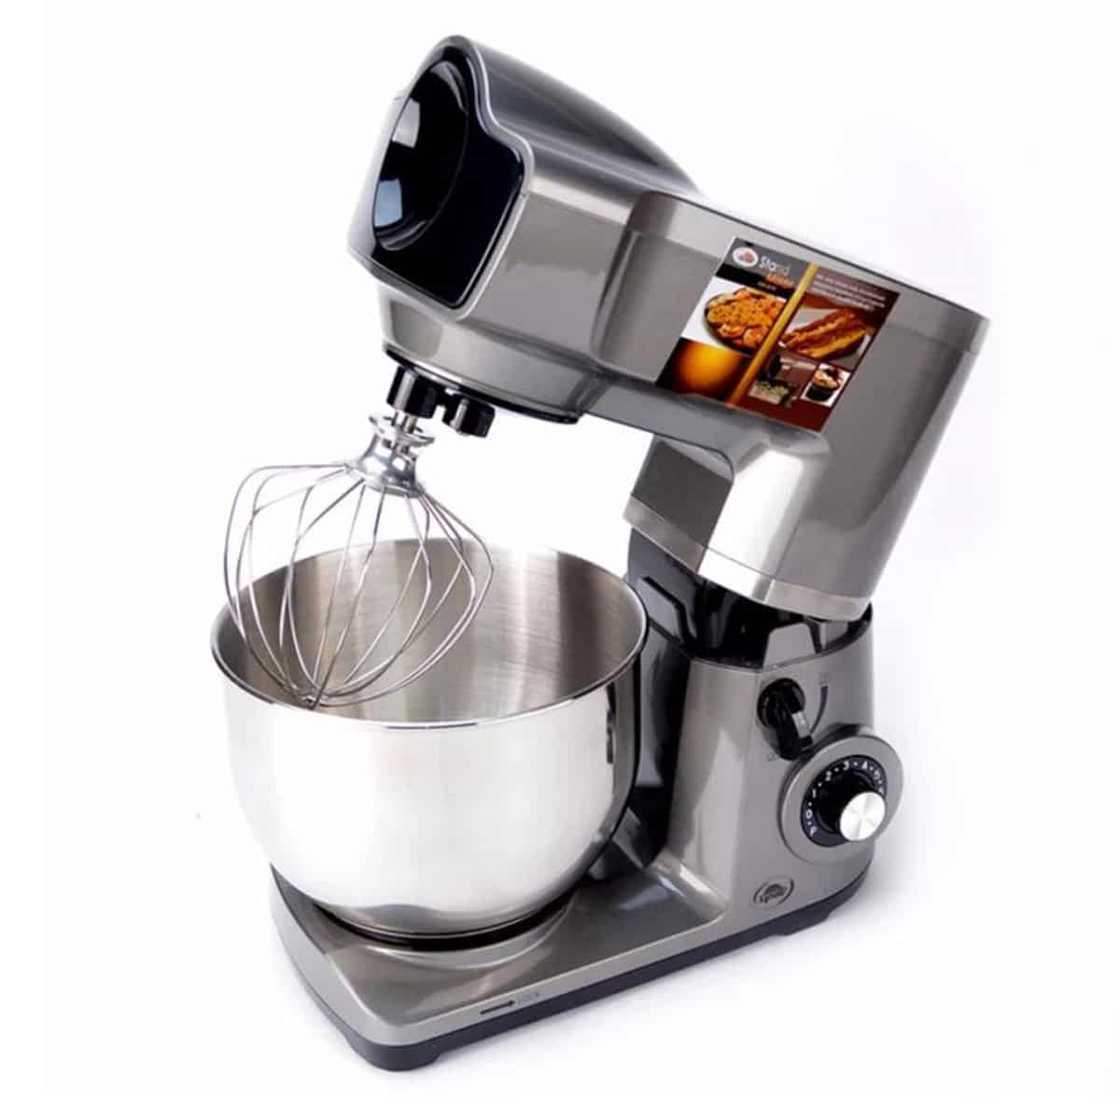 Best and affordable electric stand mixers perfect for baking at home